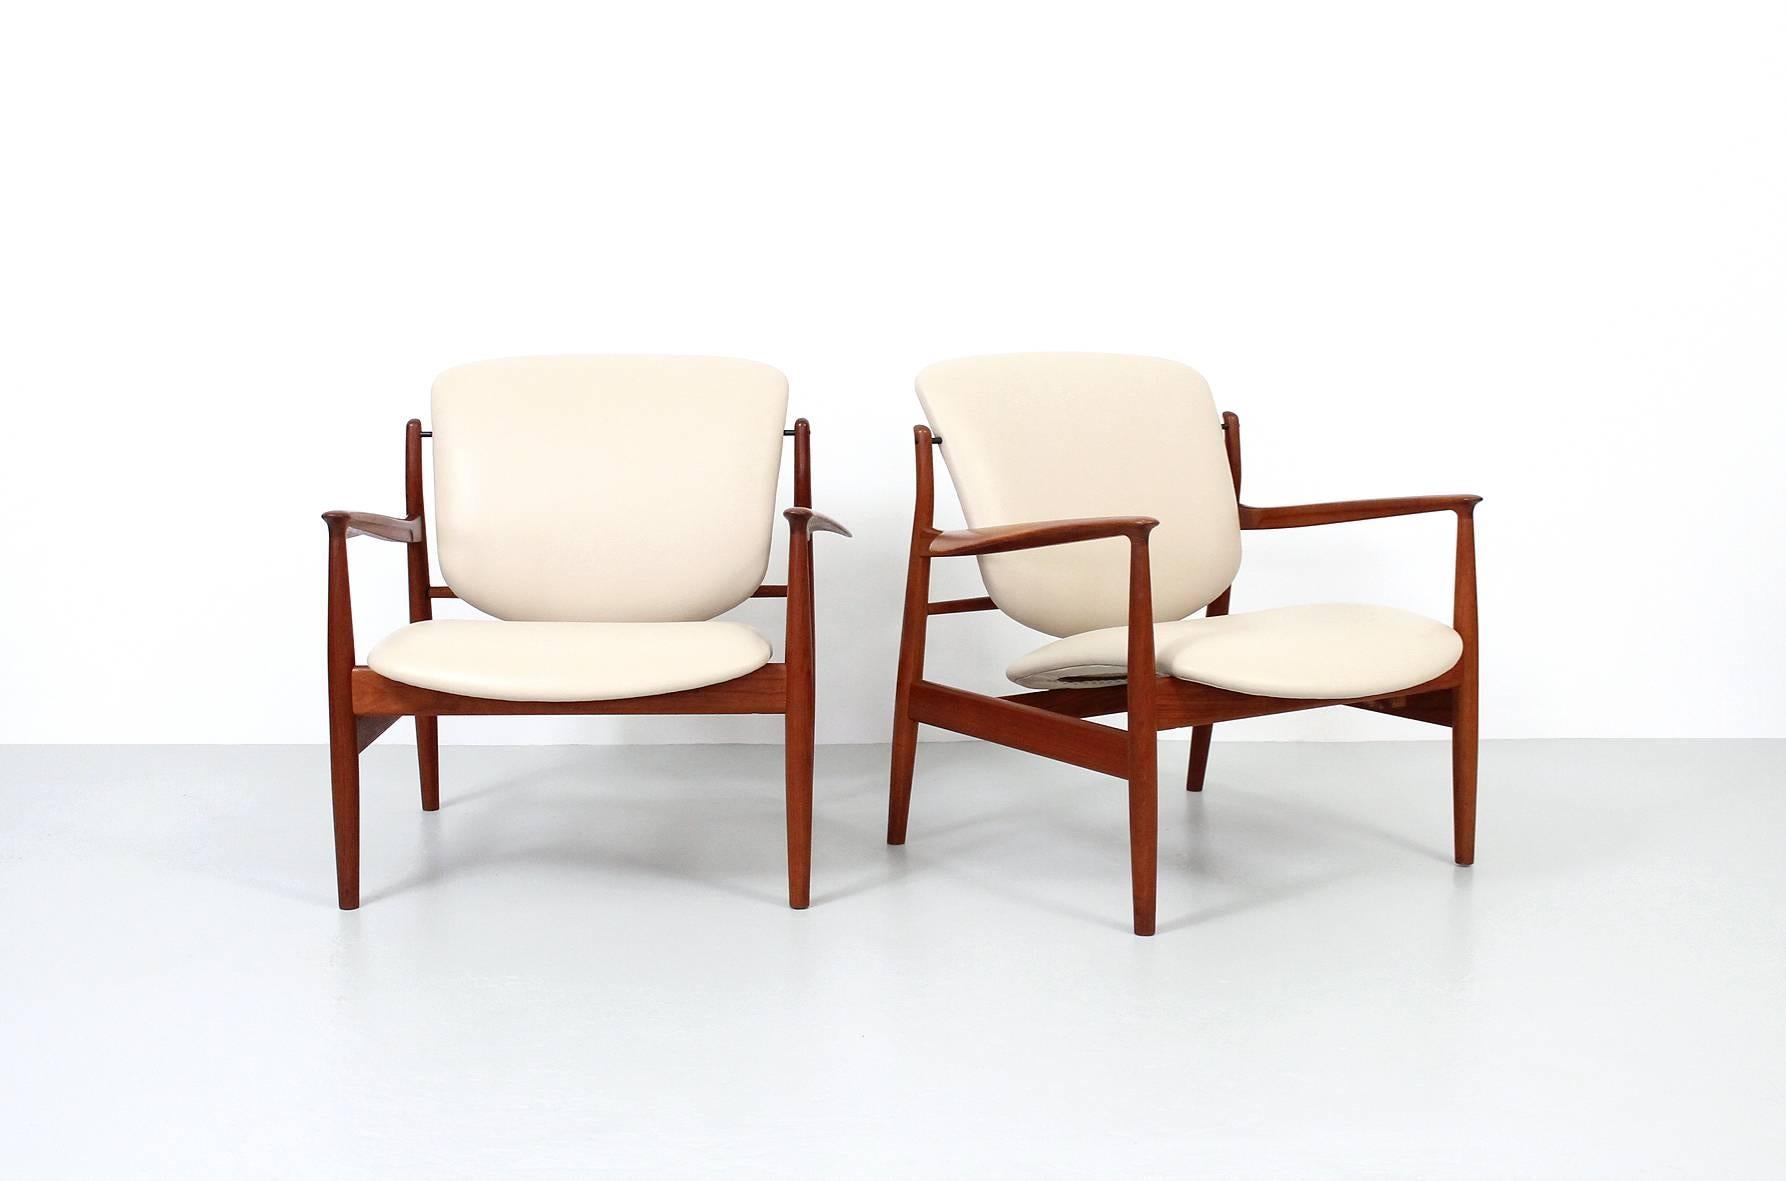 Pair of sculptural teak and leather lounge chairs designed by Finn Juhl for France & Daverkosen. These are model FD 136. Recently reupholstered in beige leather.